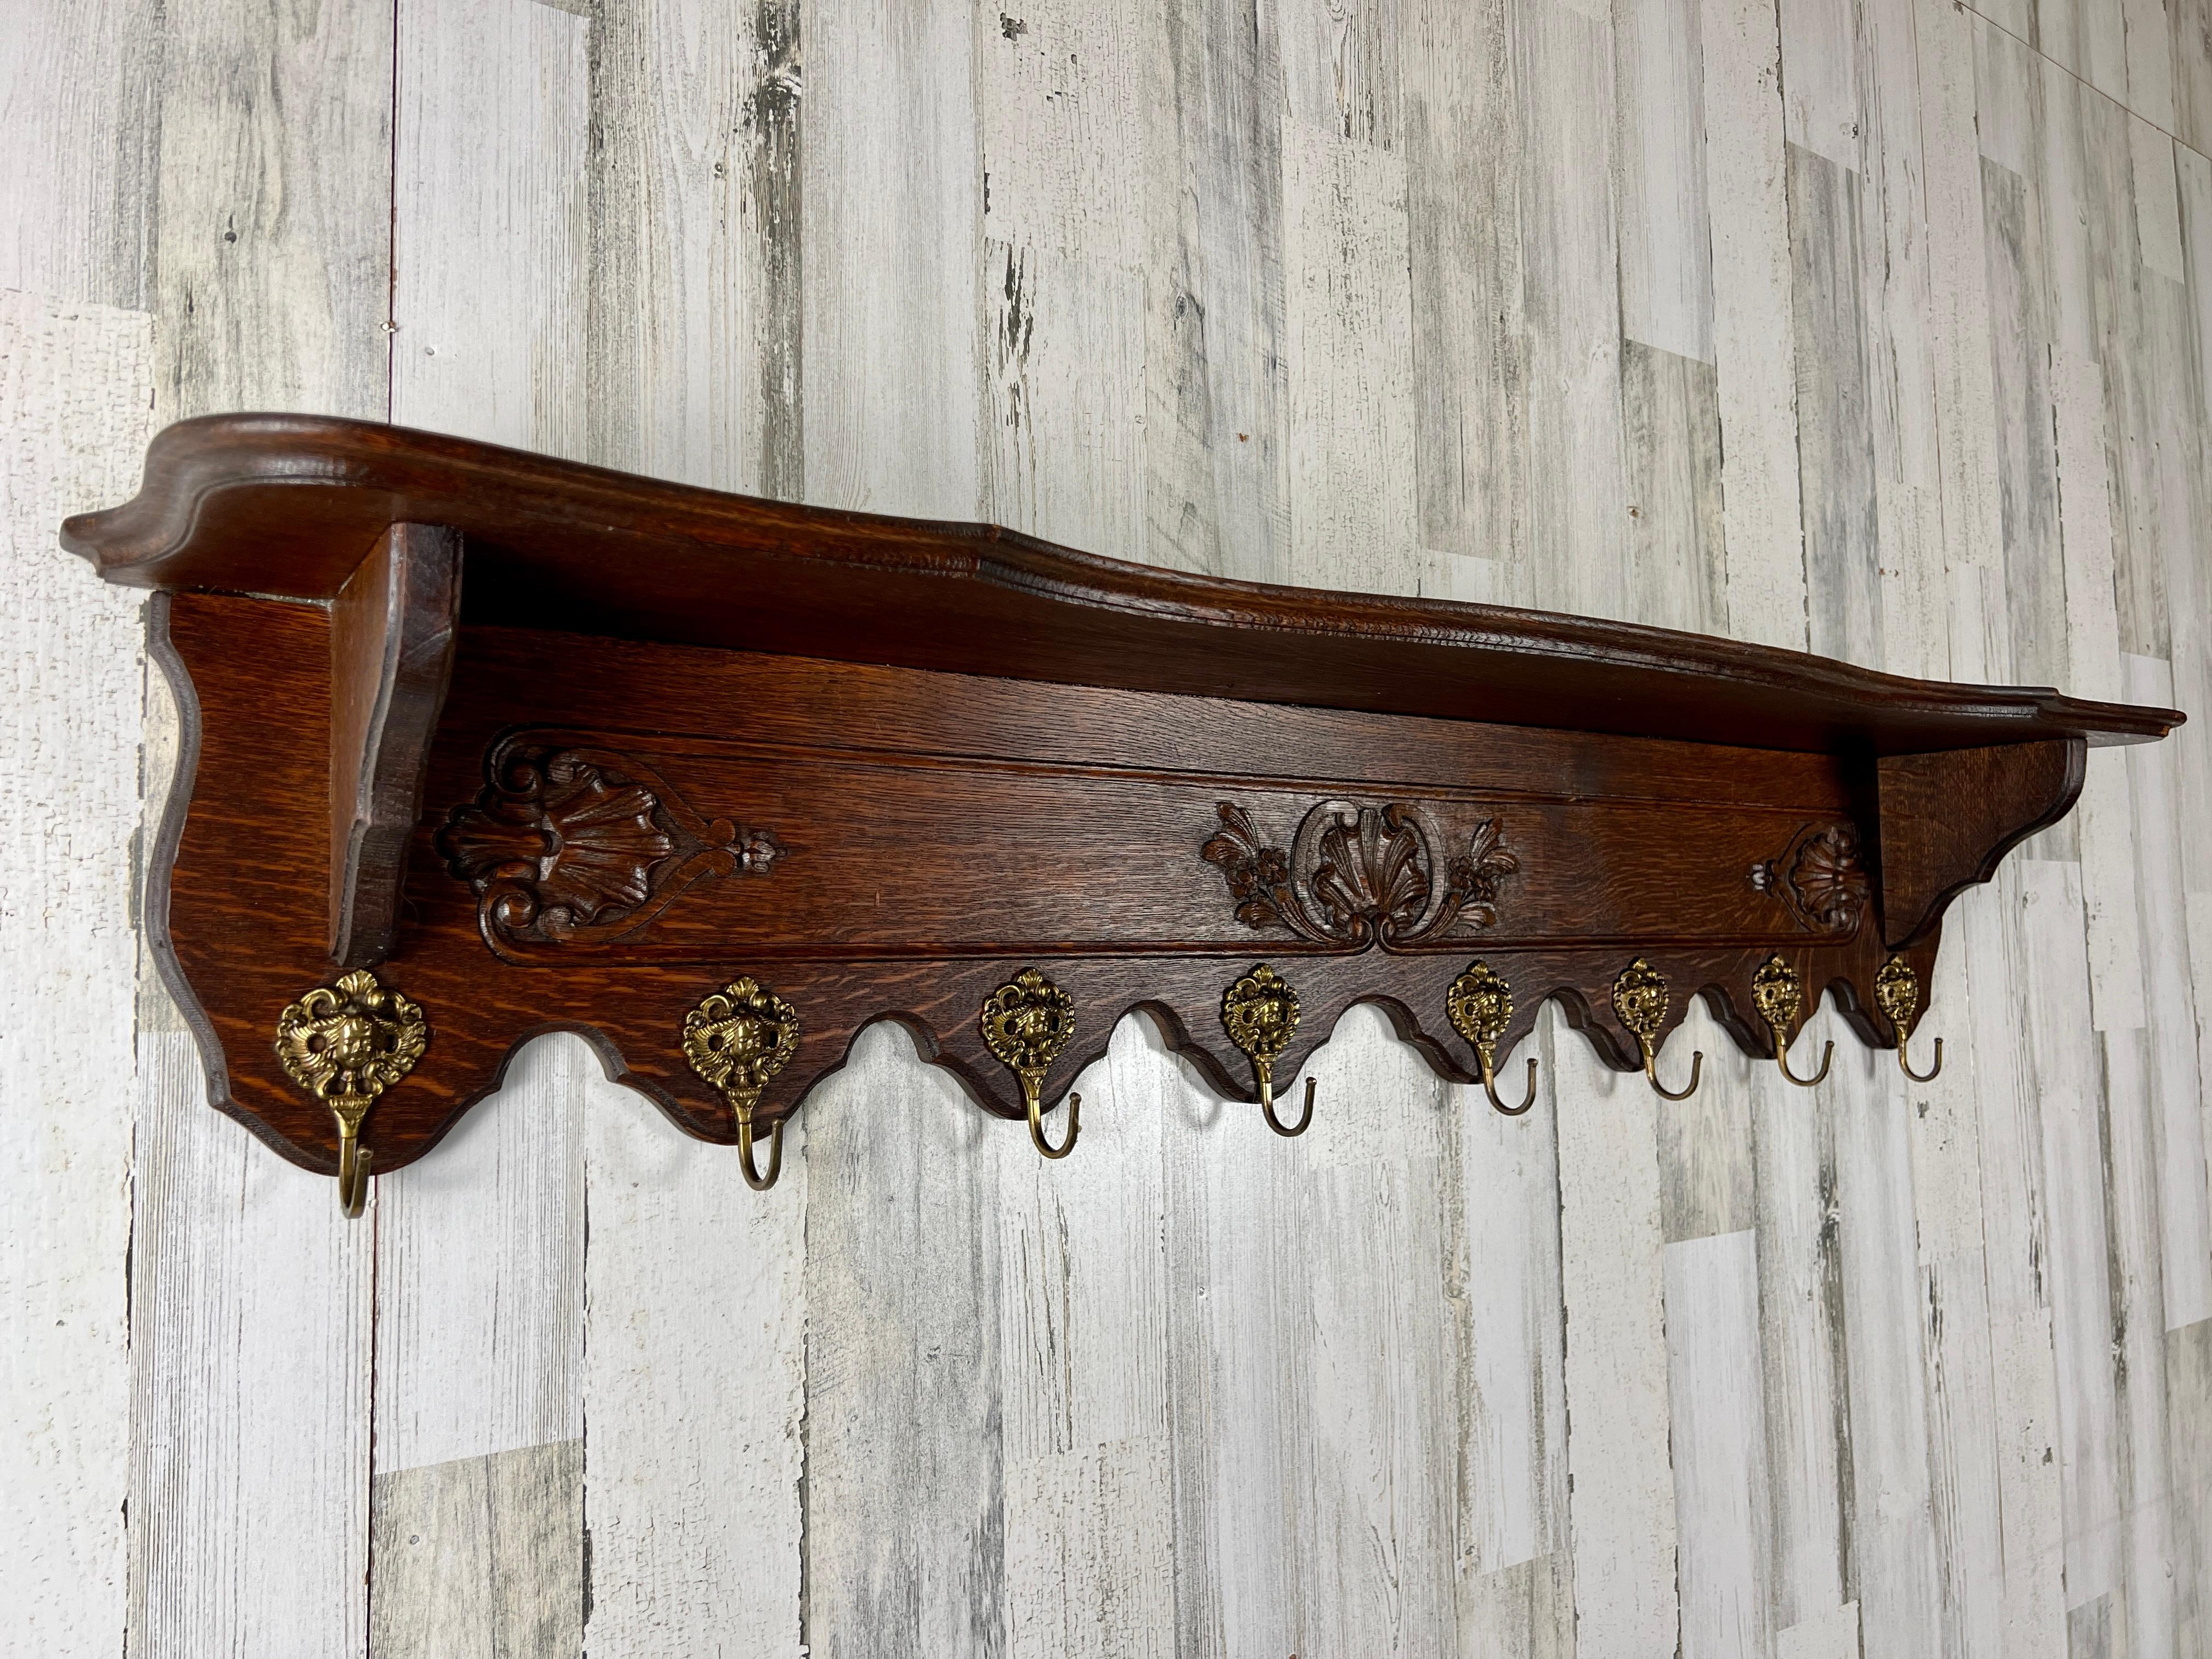 Sculpted oak with ornate brass hooks that can be used for hanging pot and pans or coats and hats. Made in France 1920.